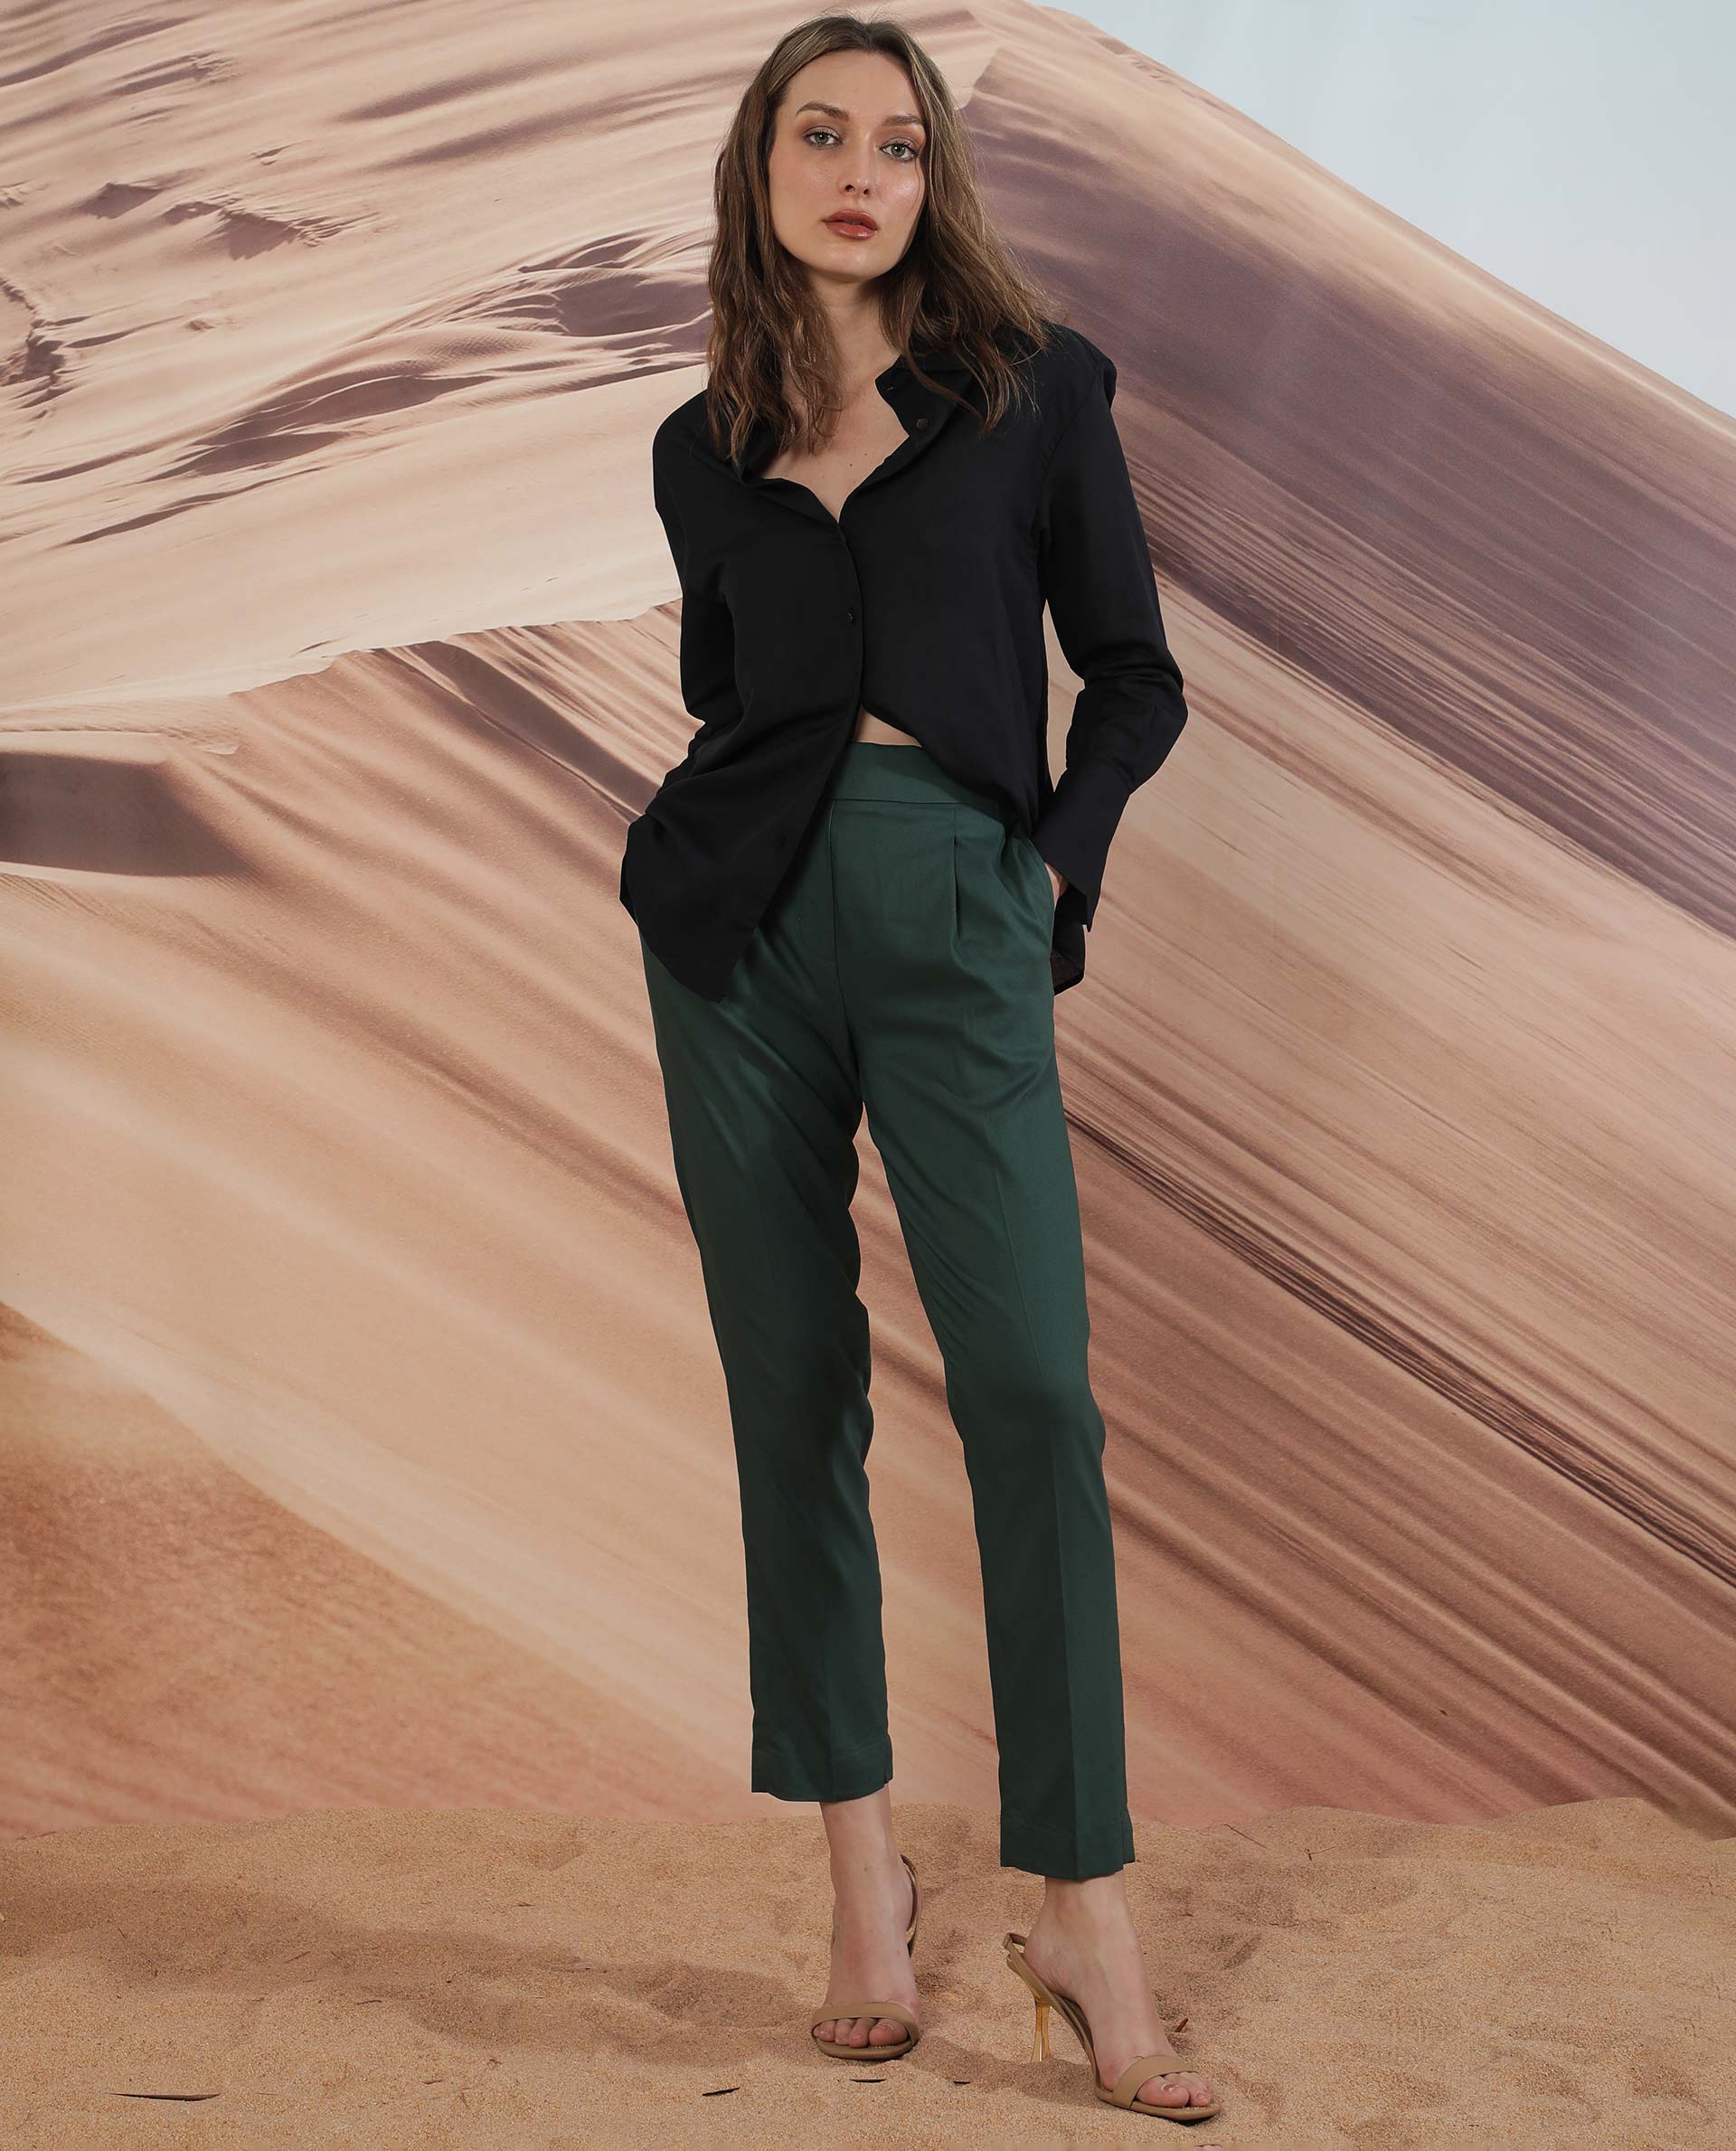 15 Olive Green Pant Outfit Ideas For Women Comfy  Stylish  Olive pants  outfit Olive green pants outfit Green pants outfit